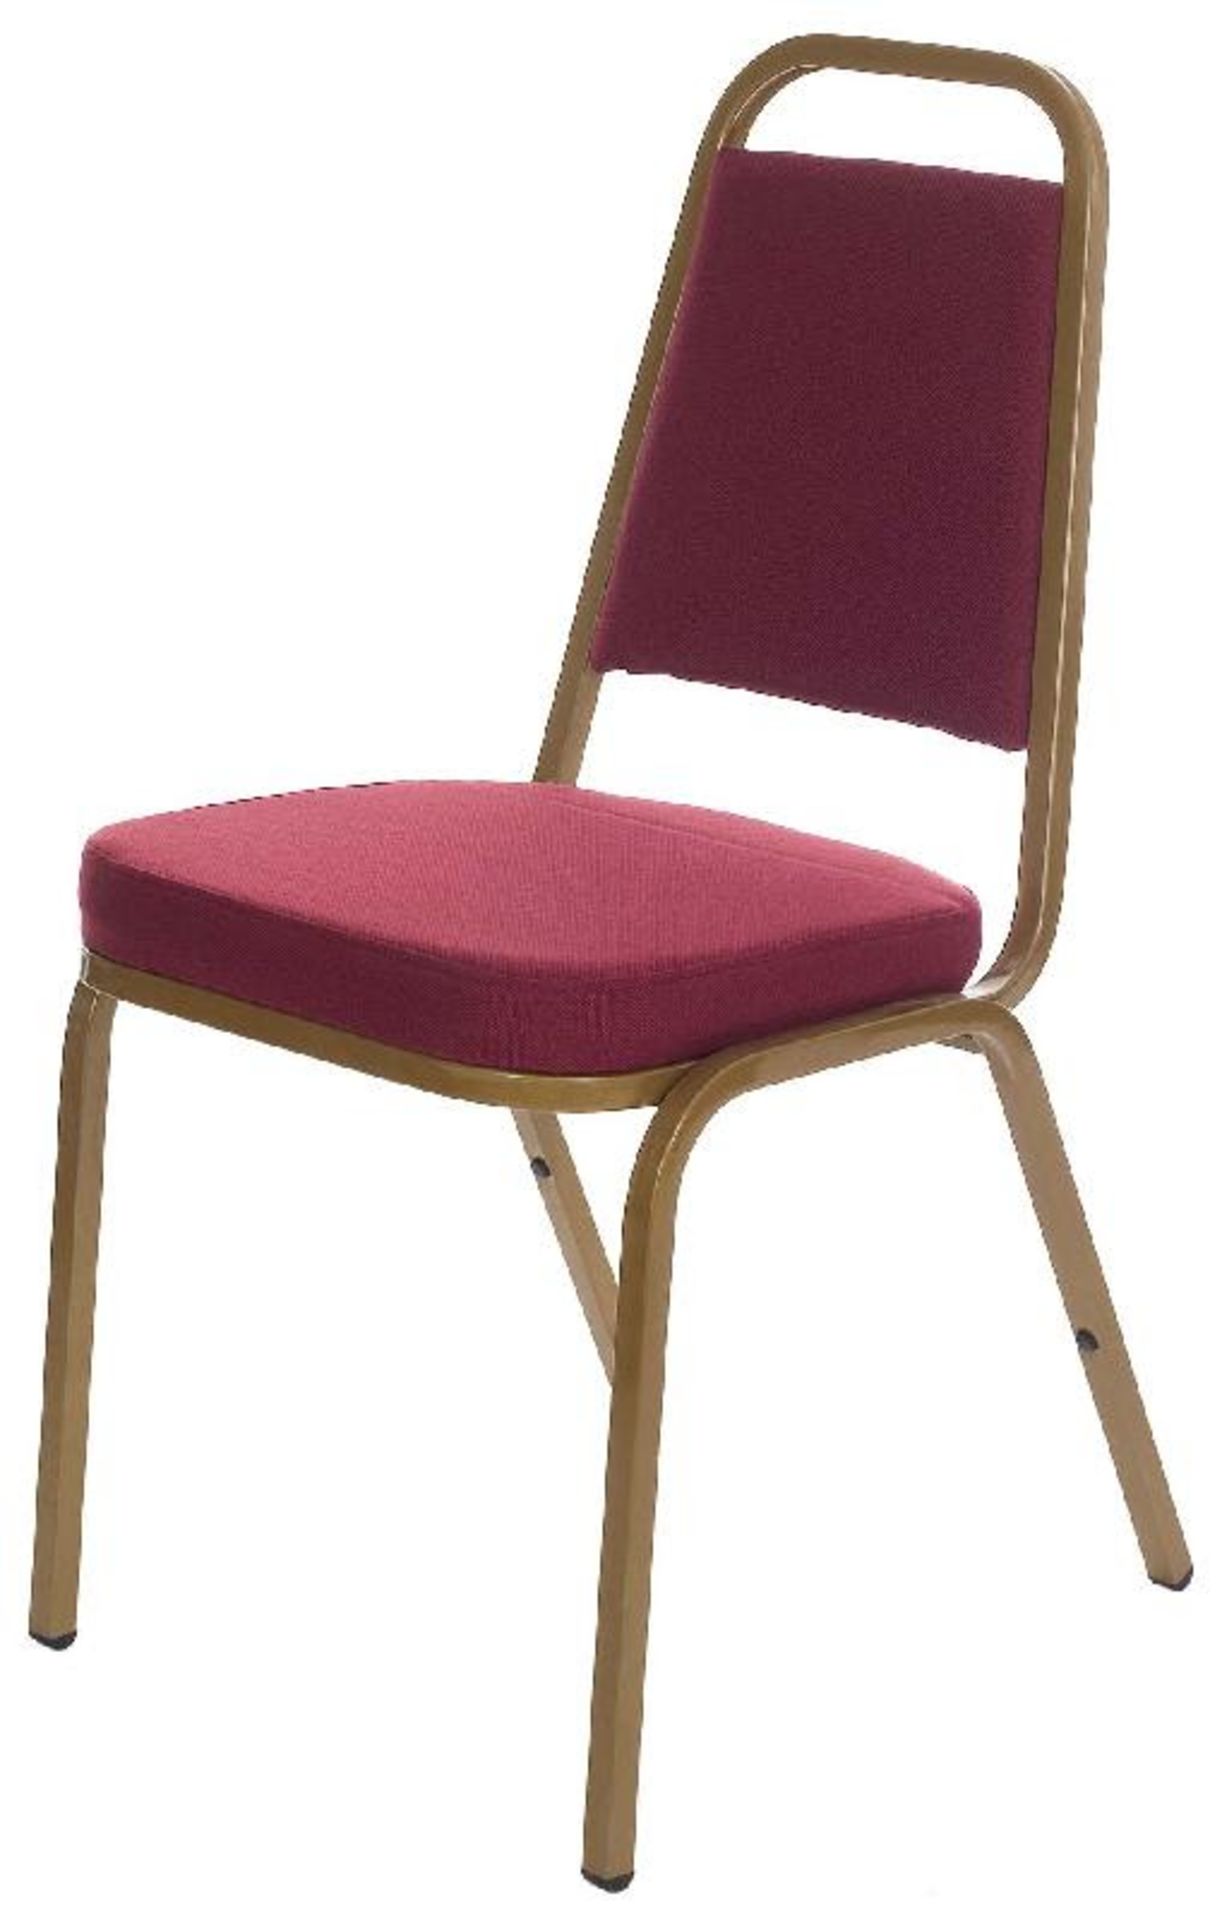 50 x Ascot Style Banqueting Chair Gold Powder Coated Frame Burgundy Upholstery